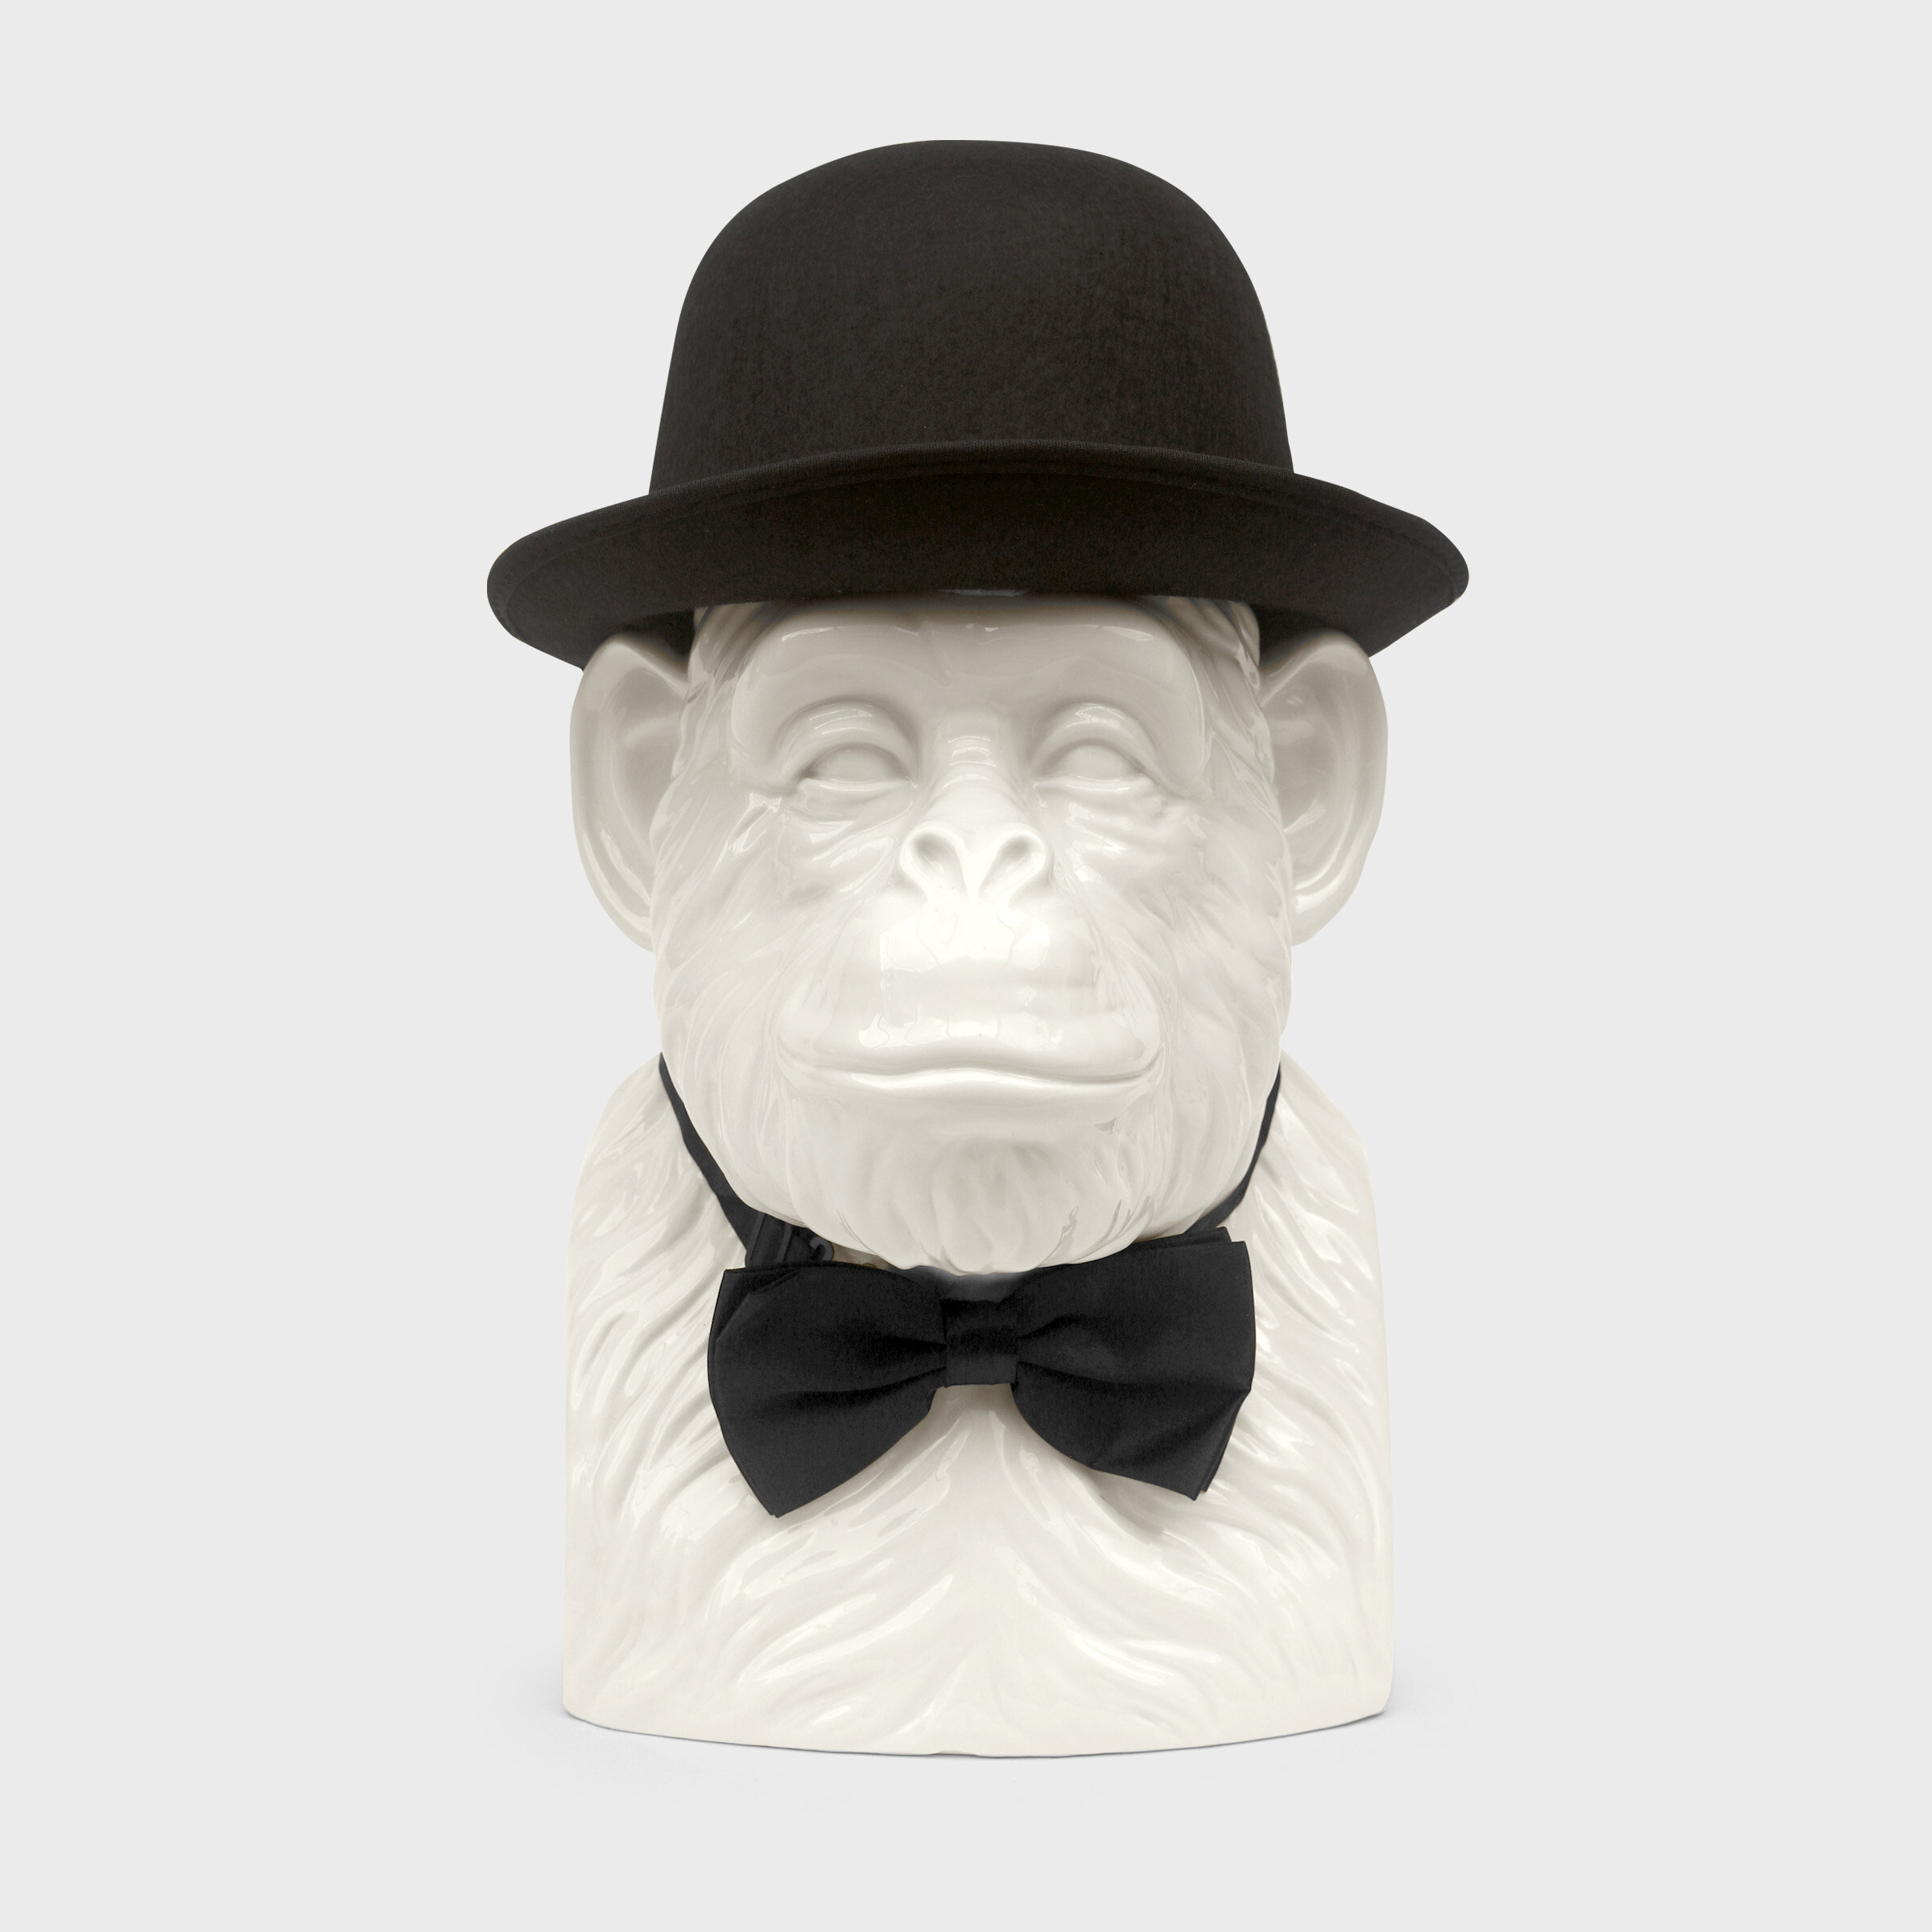 chimp with bowler hat and bow tie